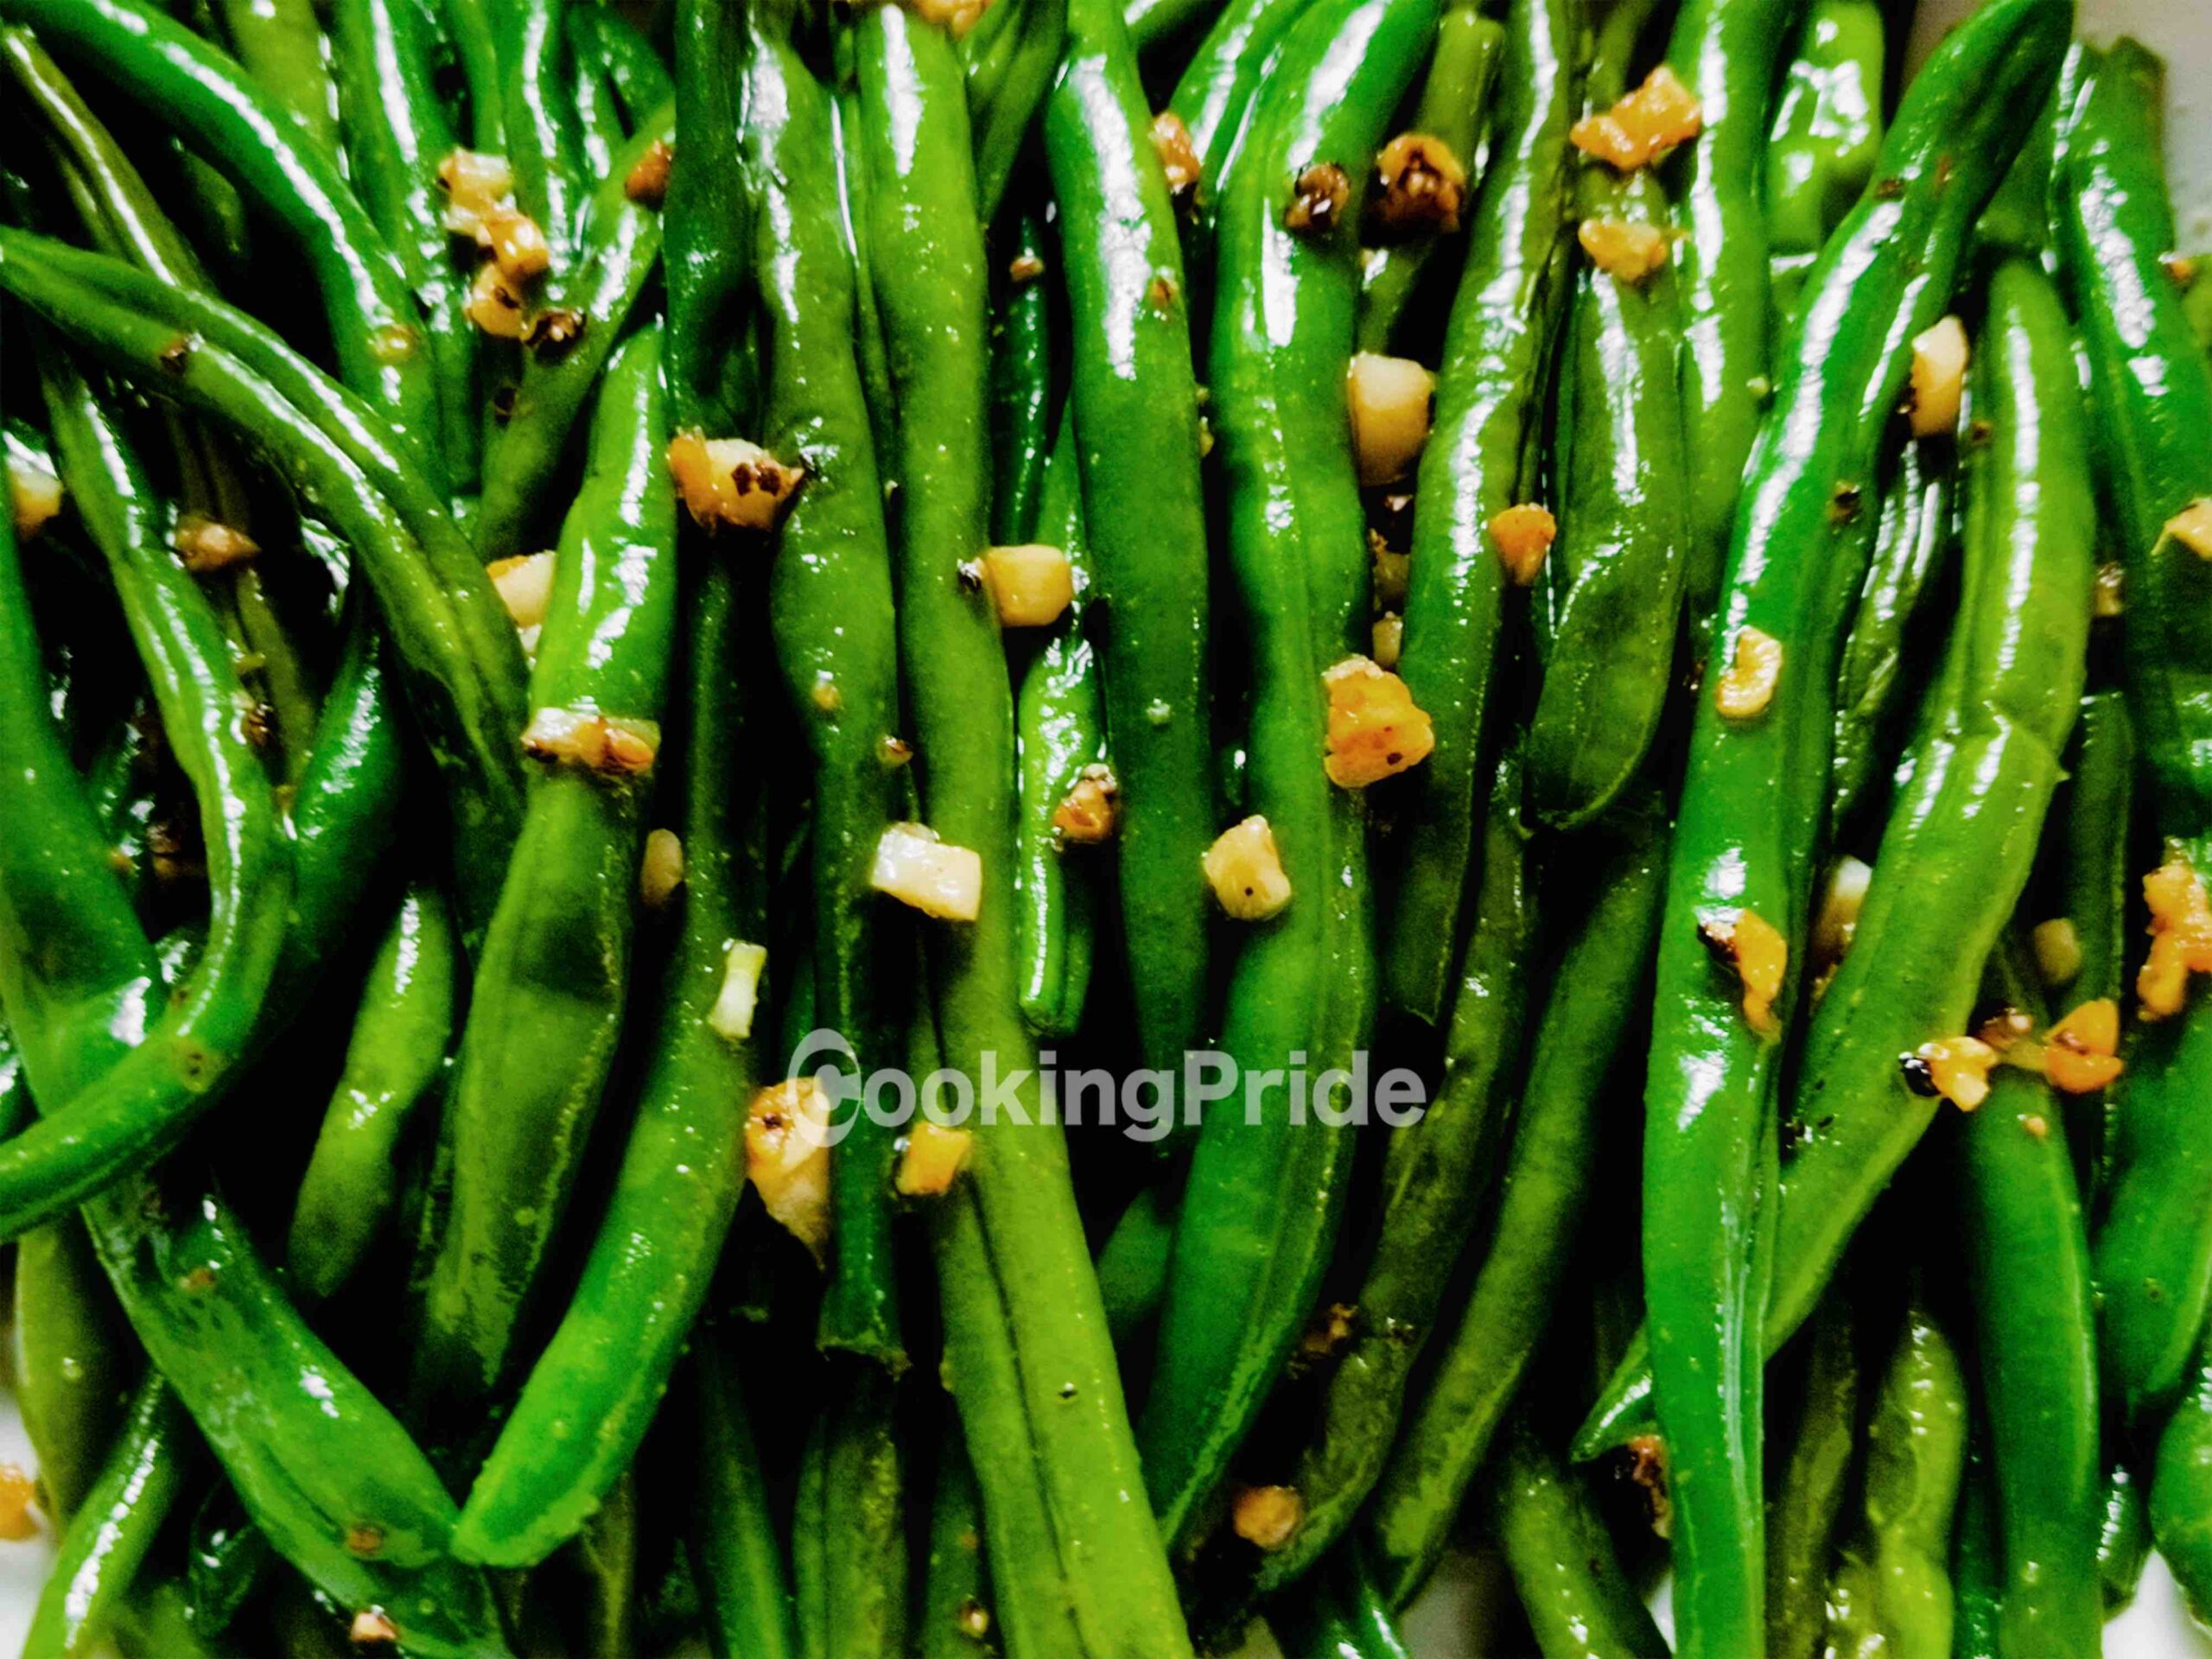 Sauteed Green Beans with Garlic by CookingPride